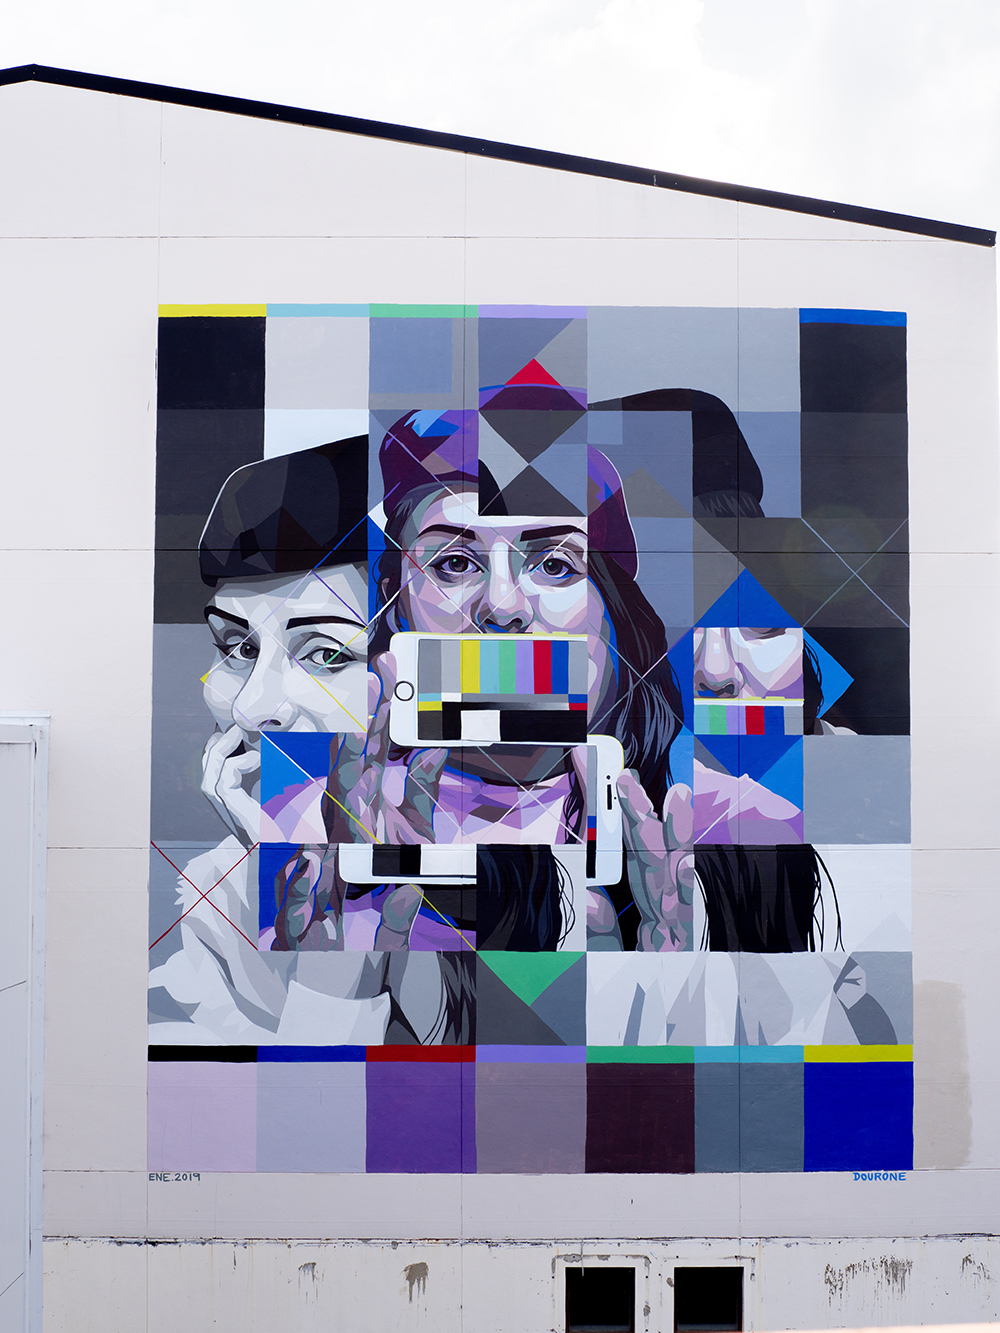 Mural by Dourone in Whangarei, New Zealand